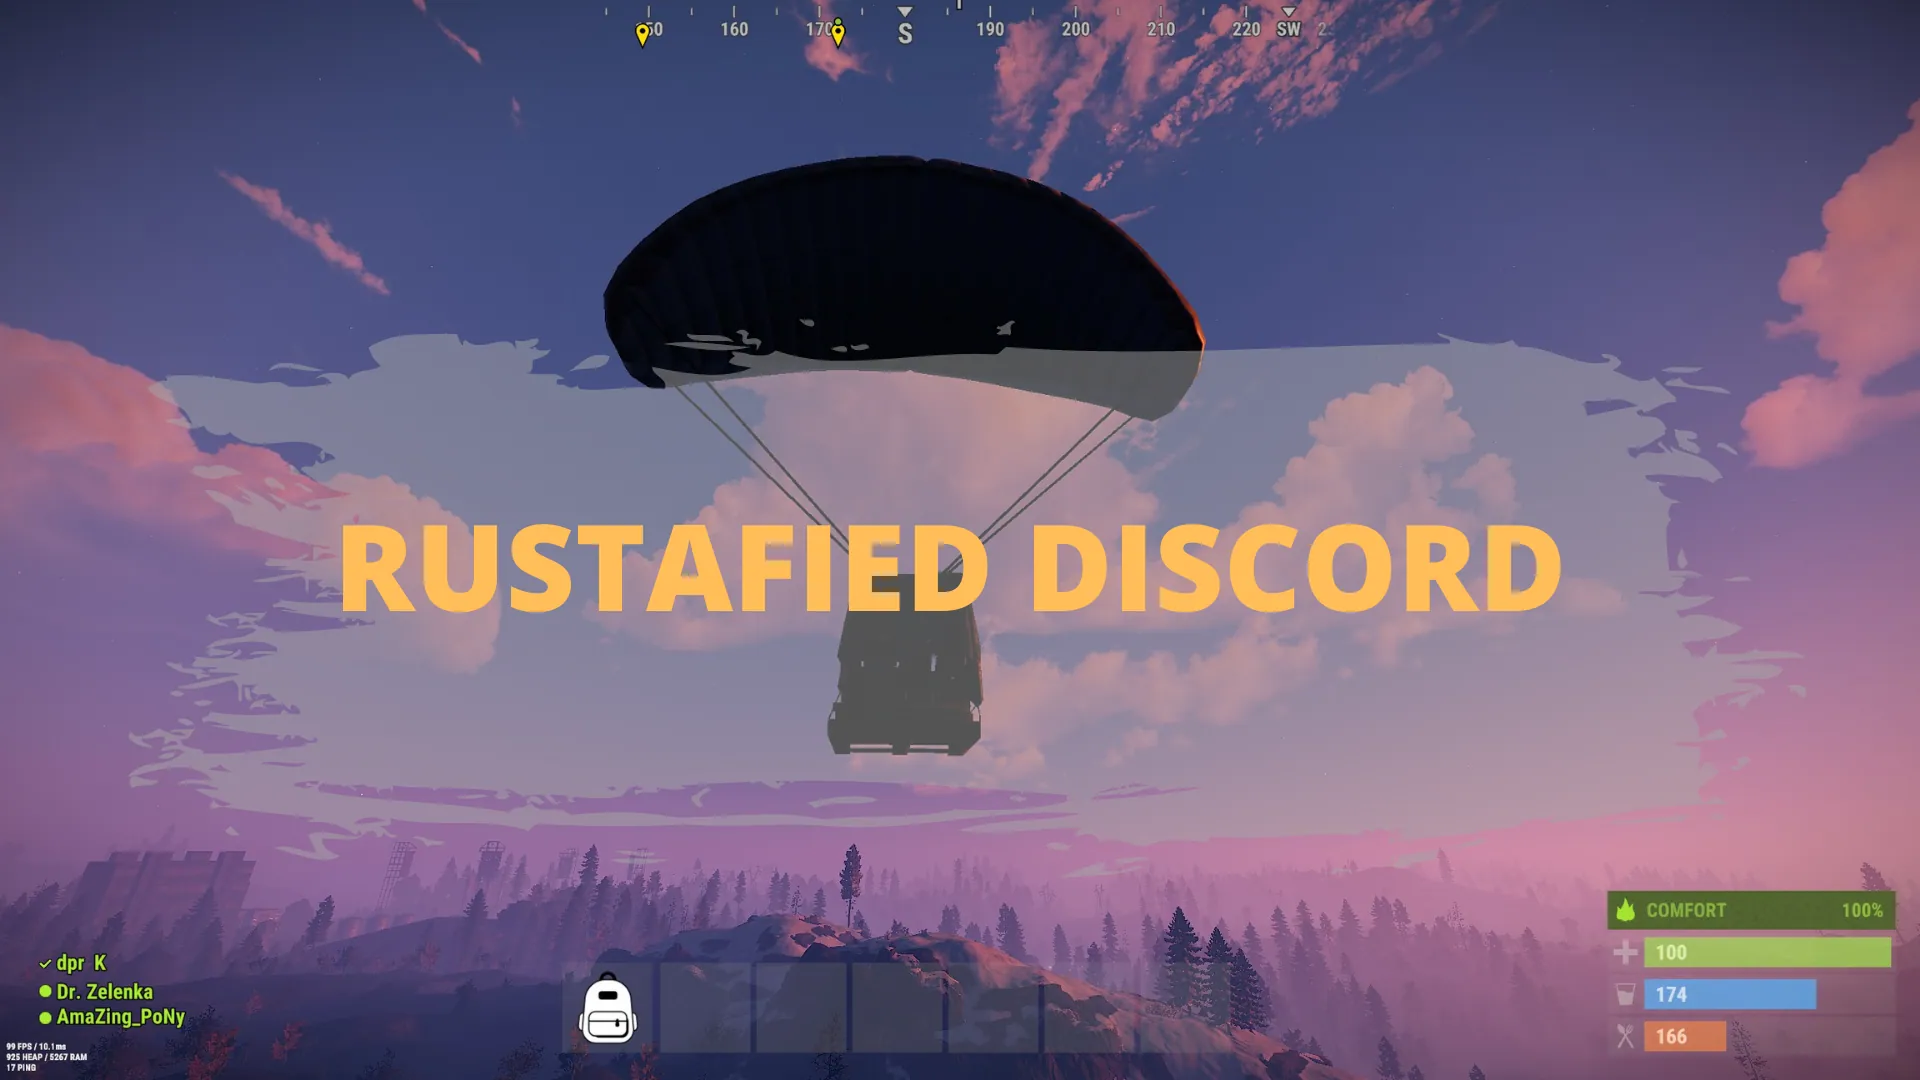 All About Rustafied Discord 